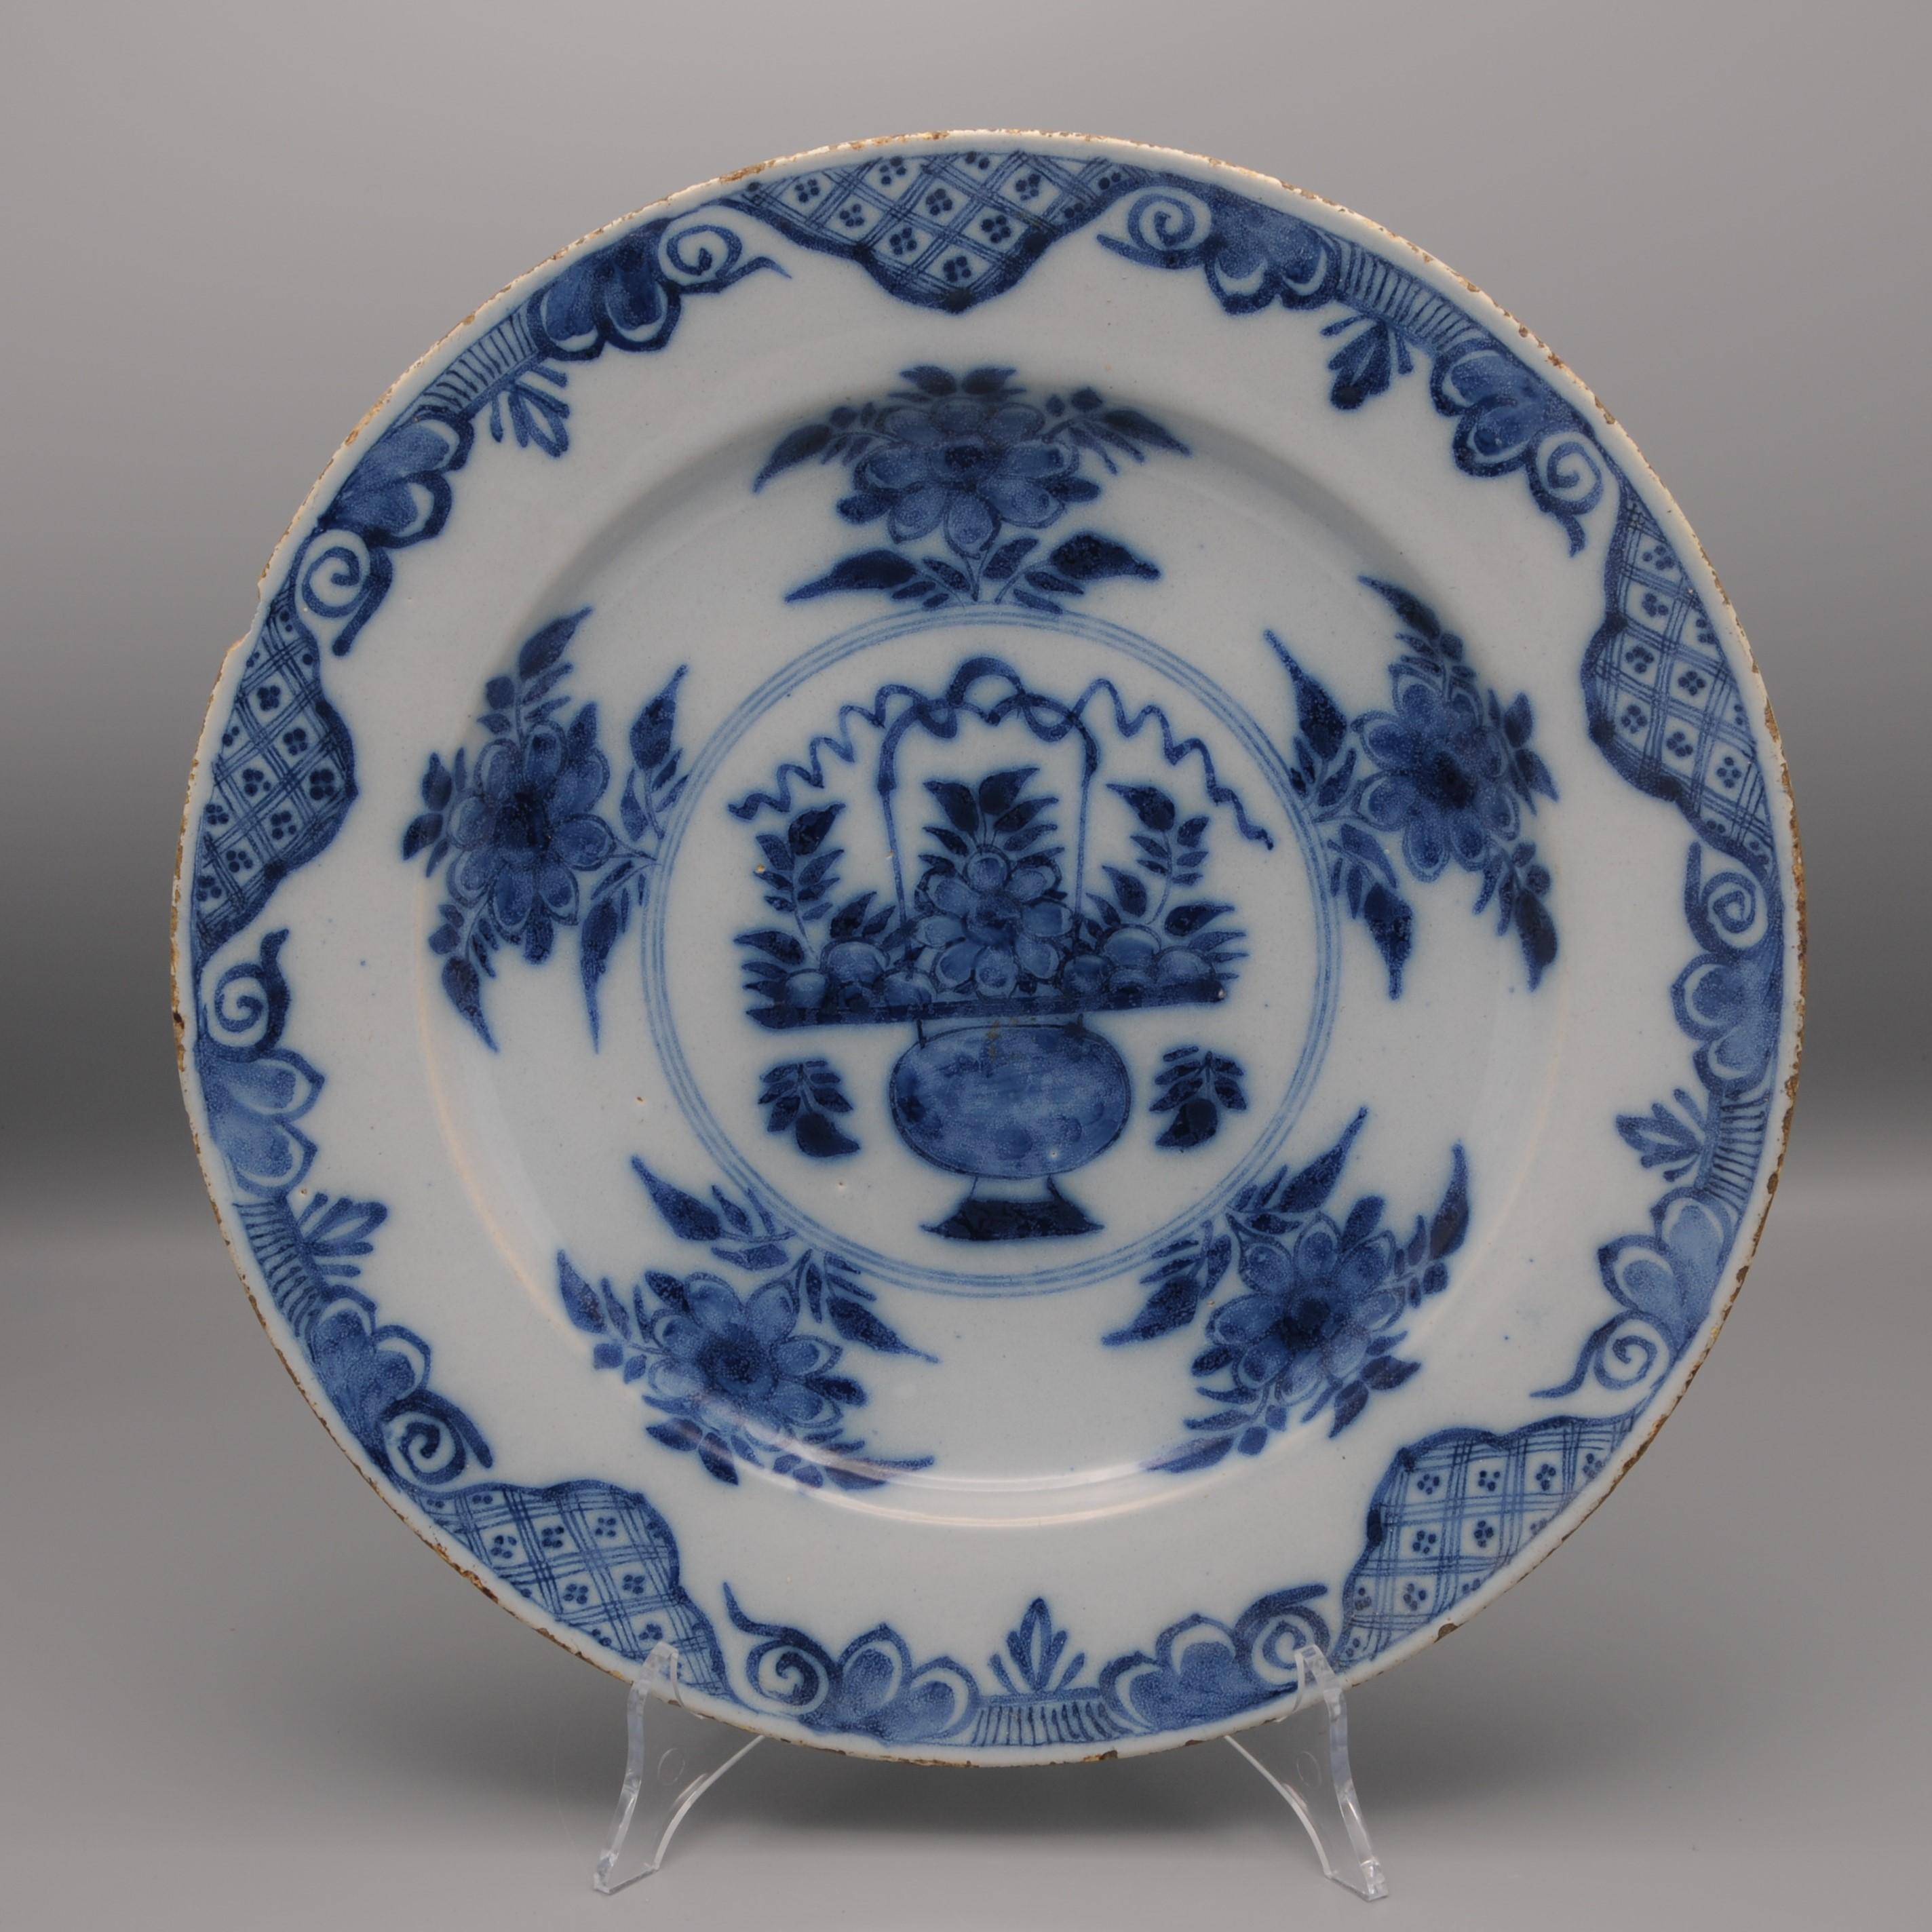 Mid 18th century Blue Delftware platter with Chinoiserie decoration of a flowering basket amidst floral sprigs
Beautiful border decoration of rich foliage, flowers and scrollwork.
Unmarked
Good quality of painting
Good condition; only usual  wear